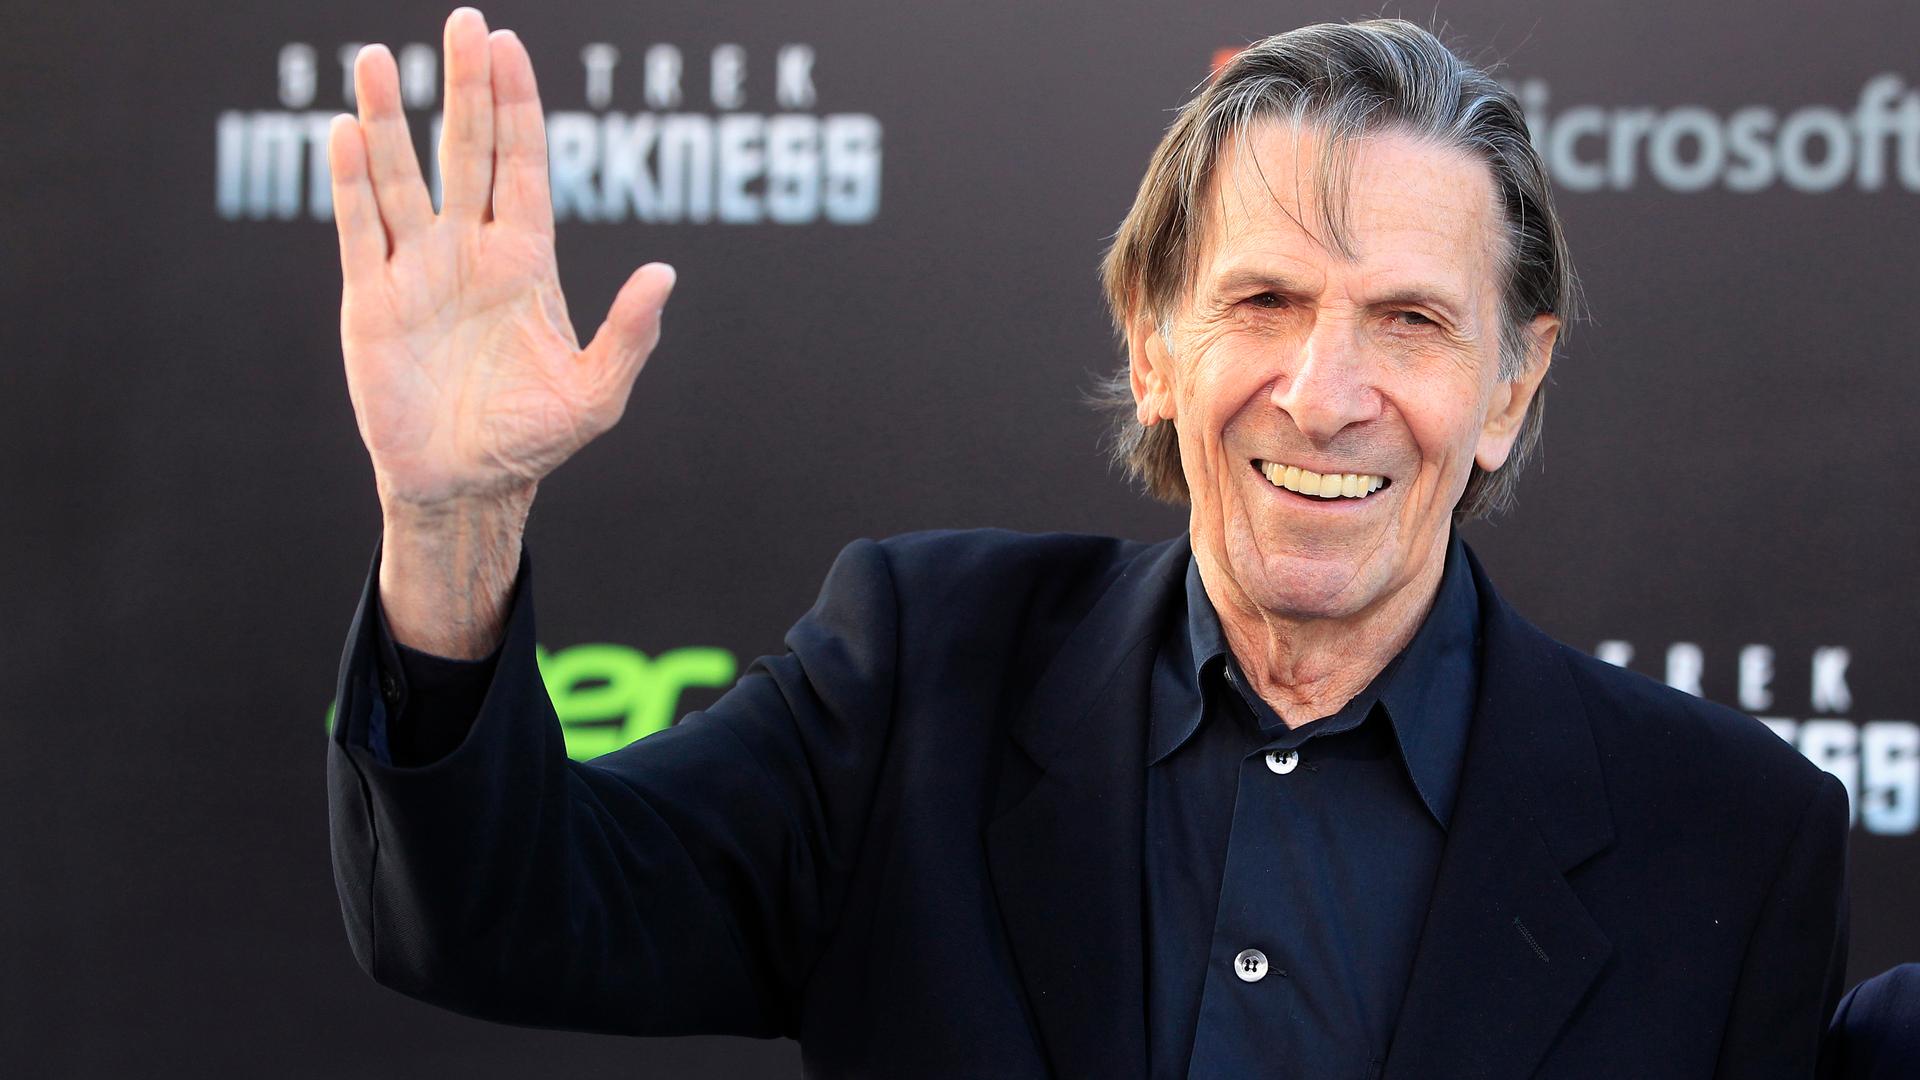 Leonard Nimoy, cast member of the new film "Star Trek Into Darkness," poses as he arrives at the film's premiere in Hollywood on May 14, 2013.